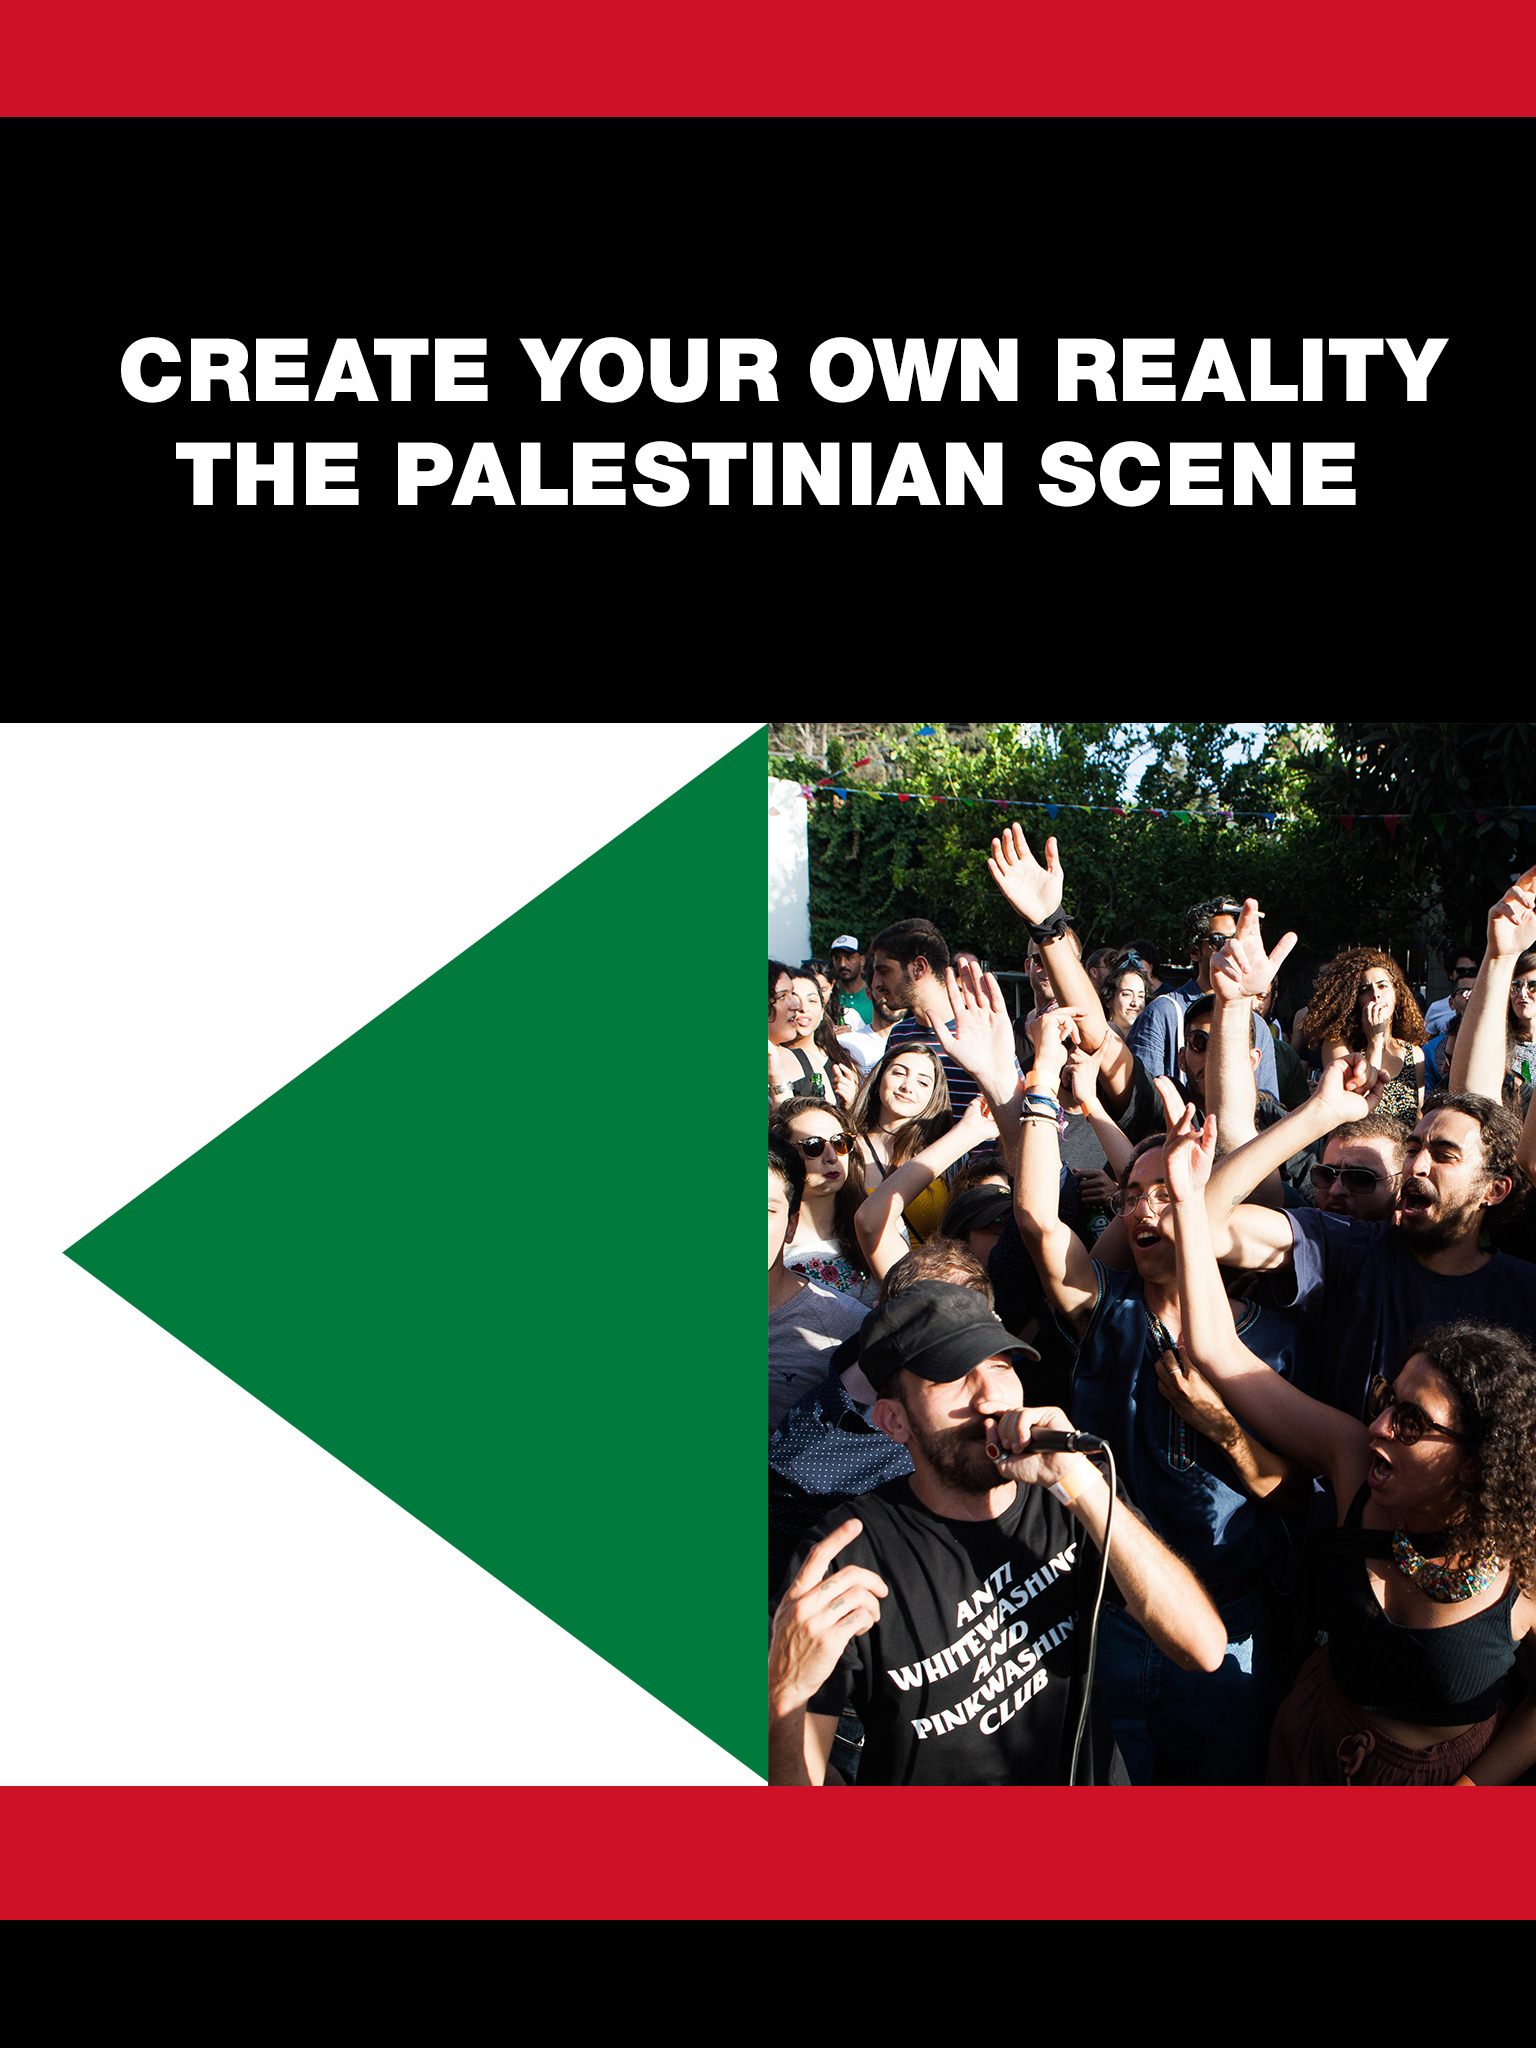 Create your own reality: The Palestinian scene